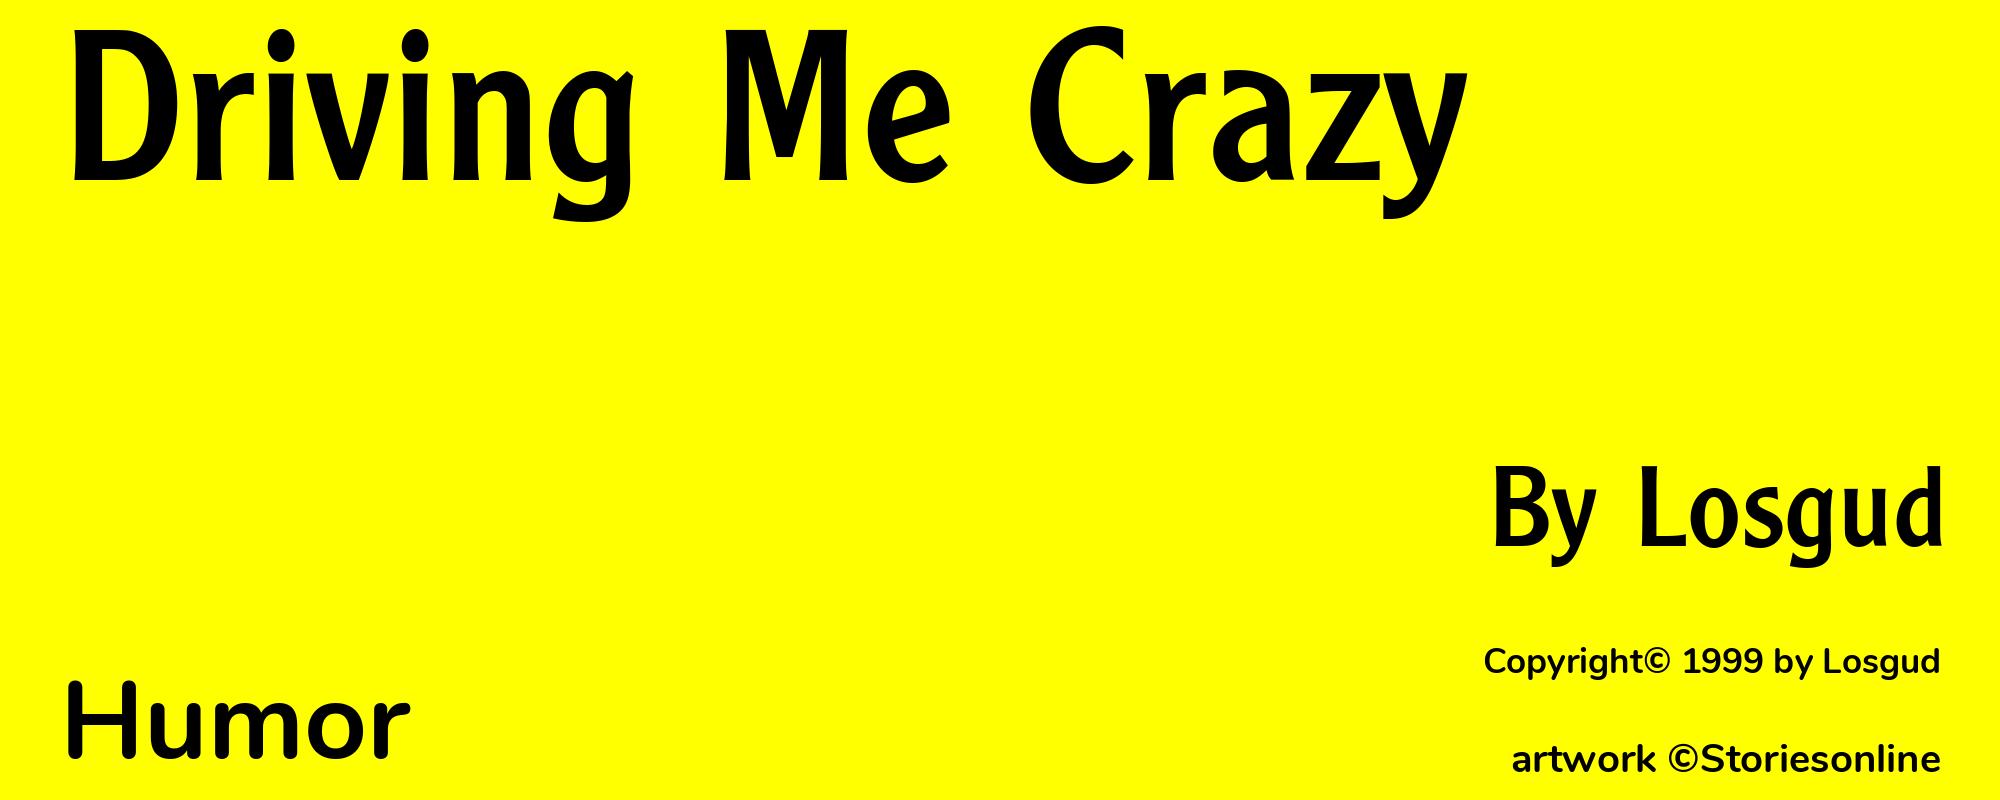 Driving Me Crazy - Cover